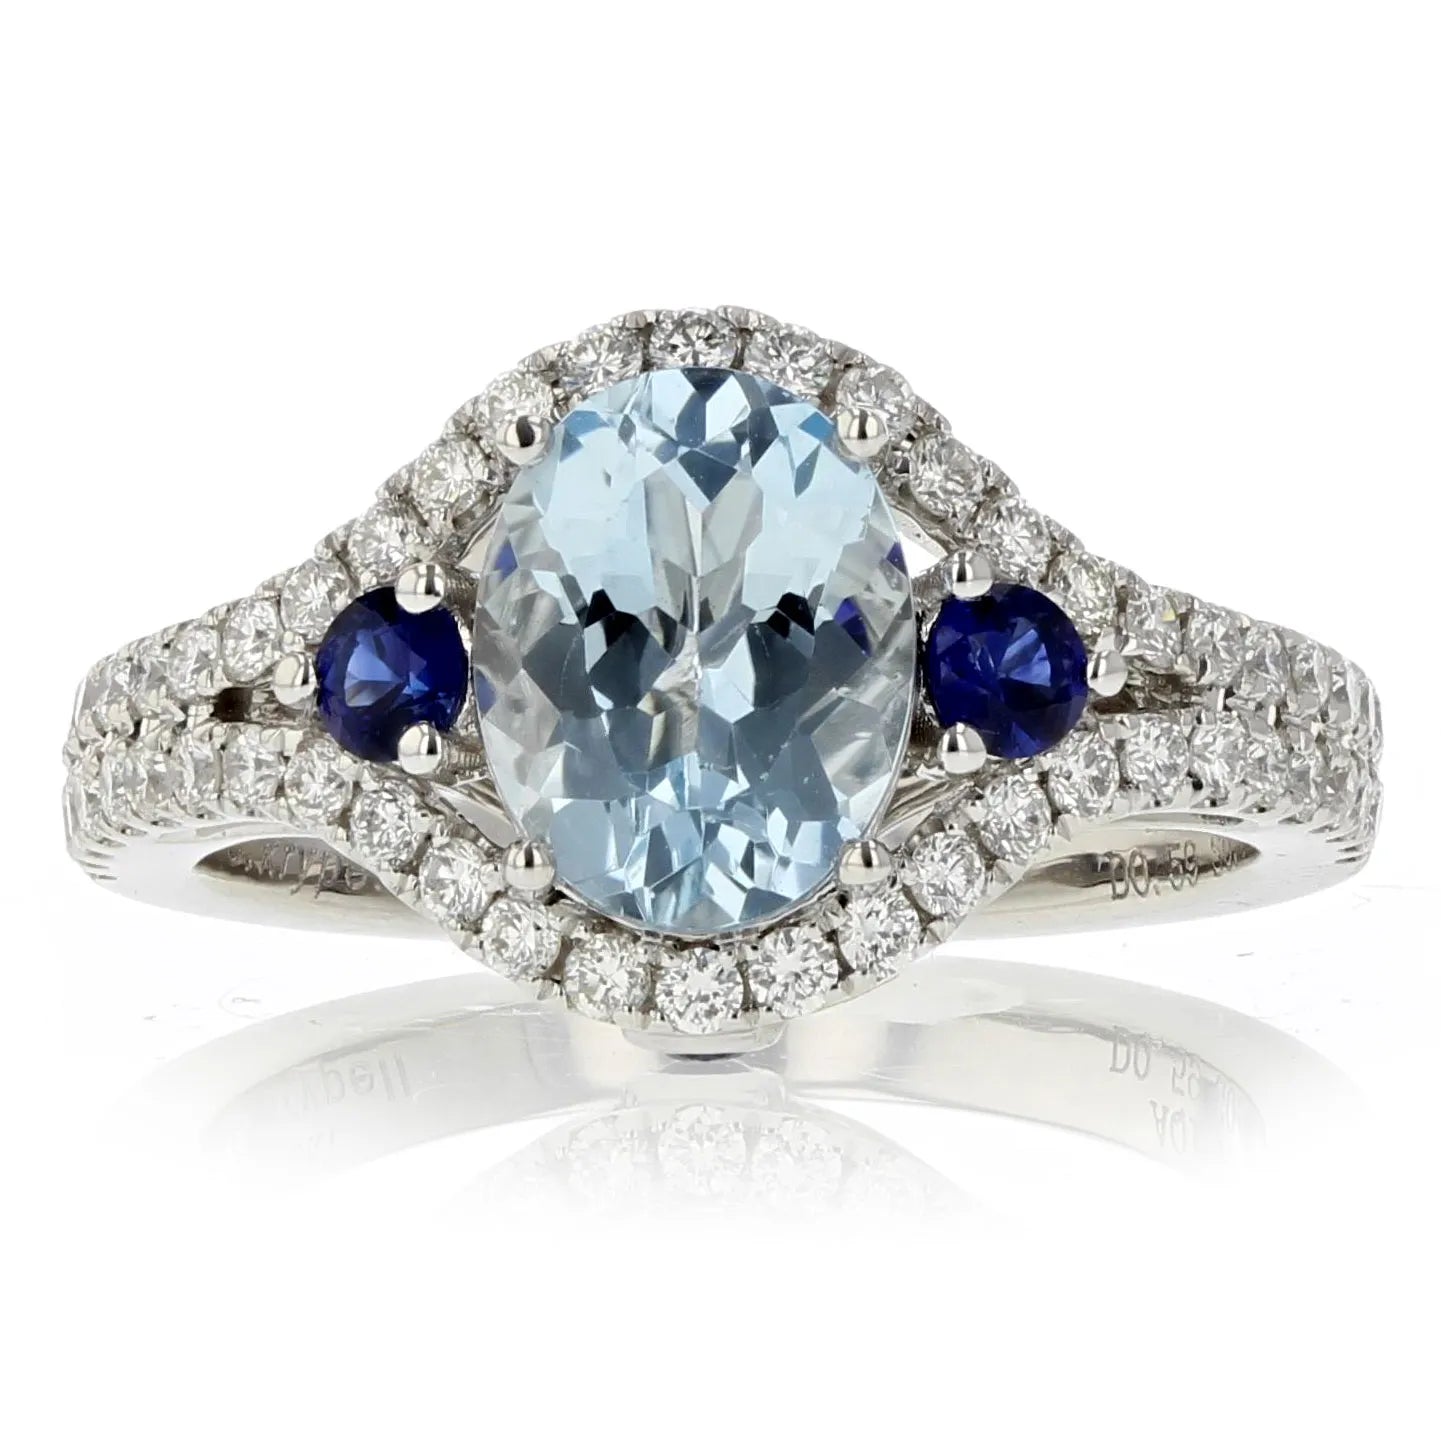 Aquamarines: The Story Behind March’s Birthstone